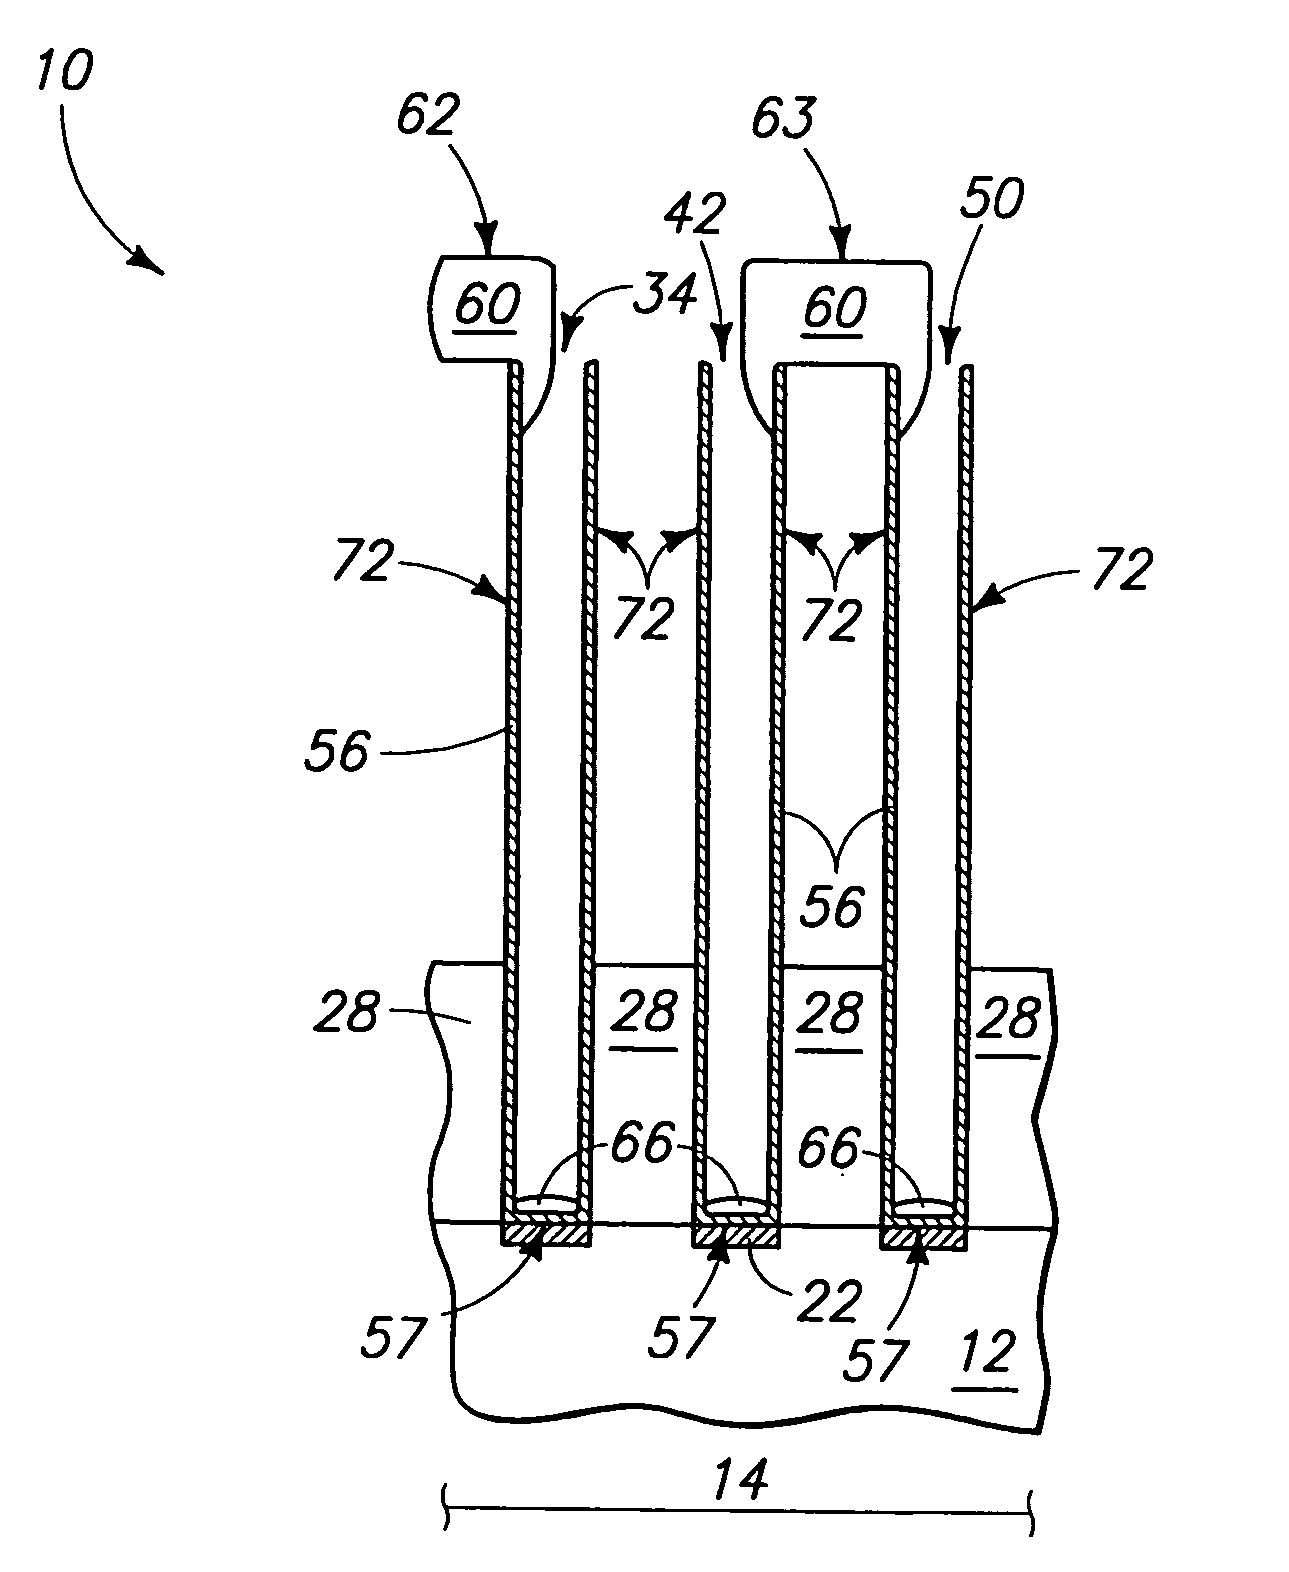 Methods of forming a plurality of capacitors